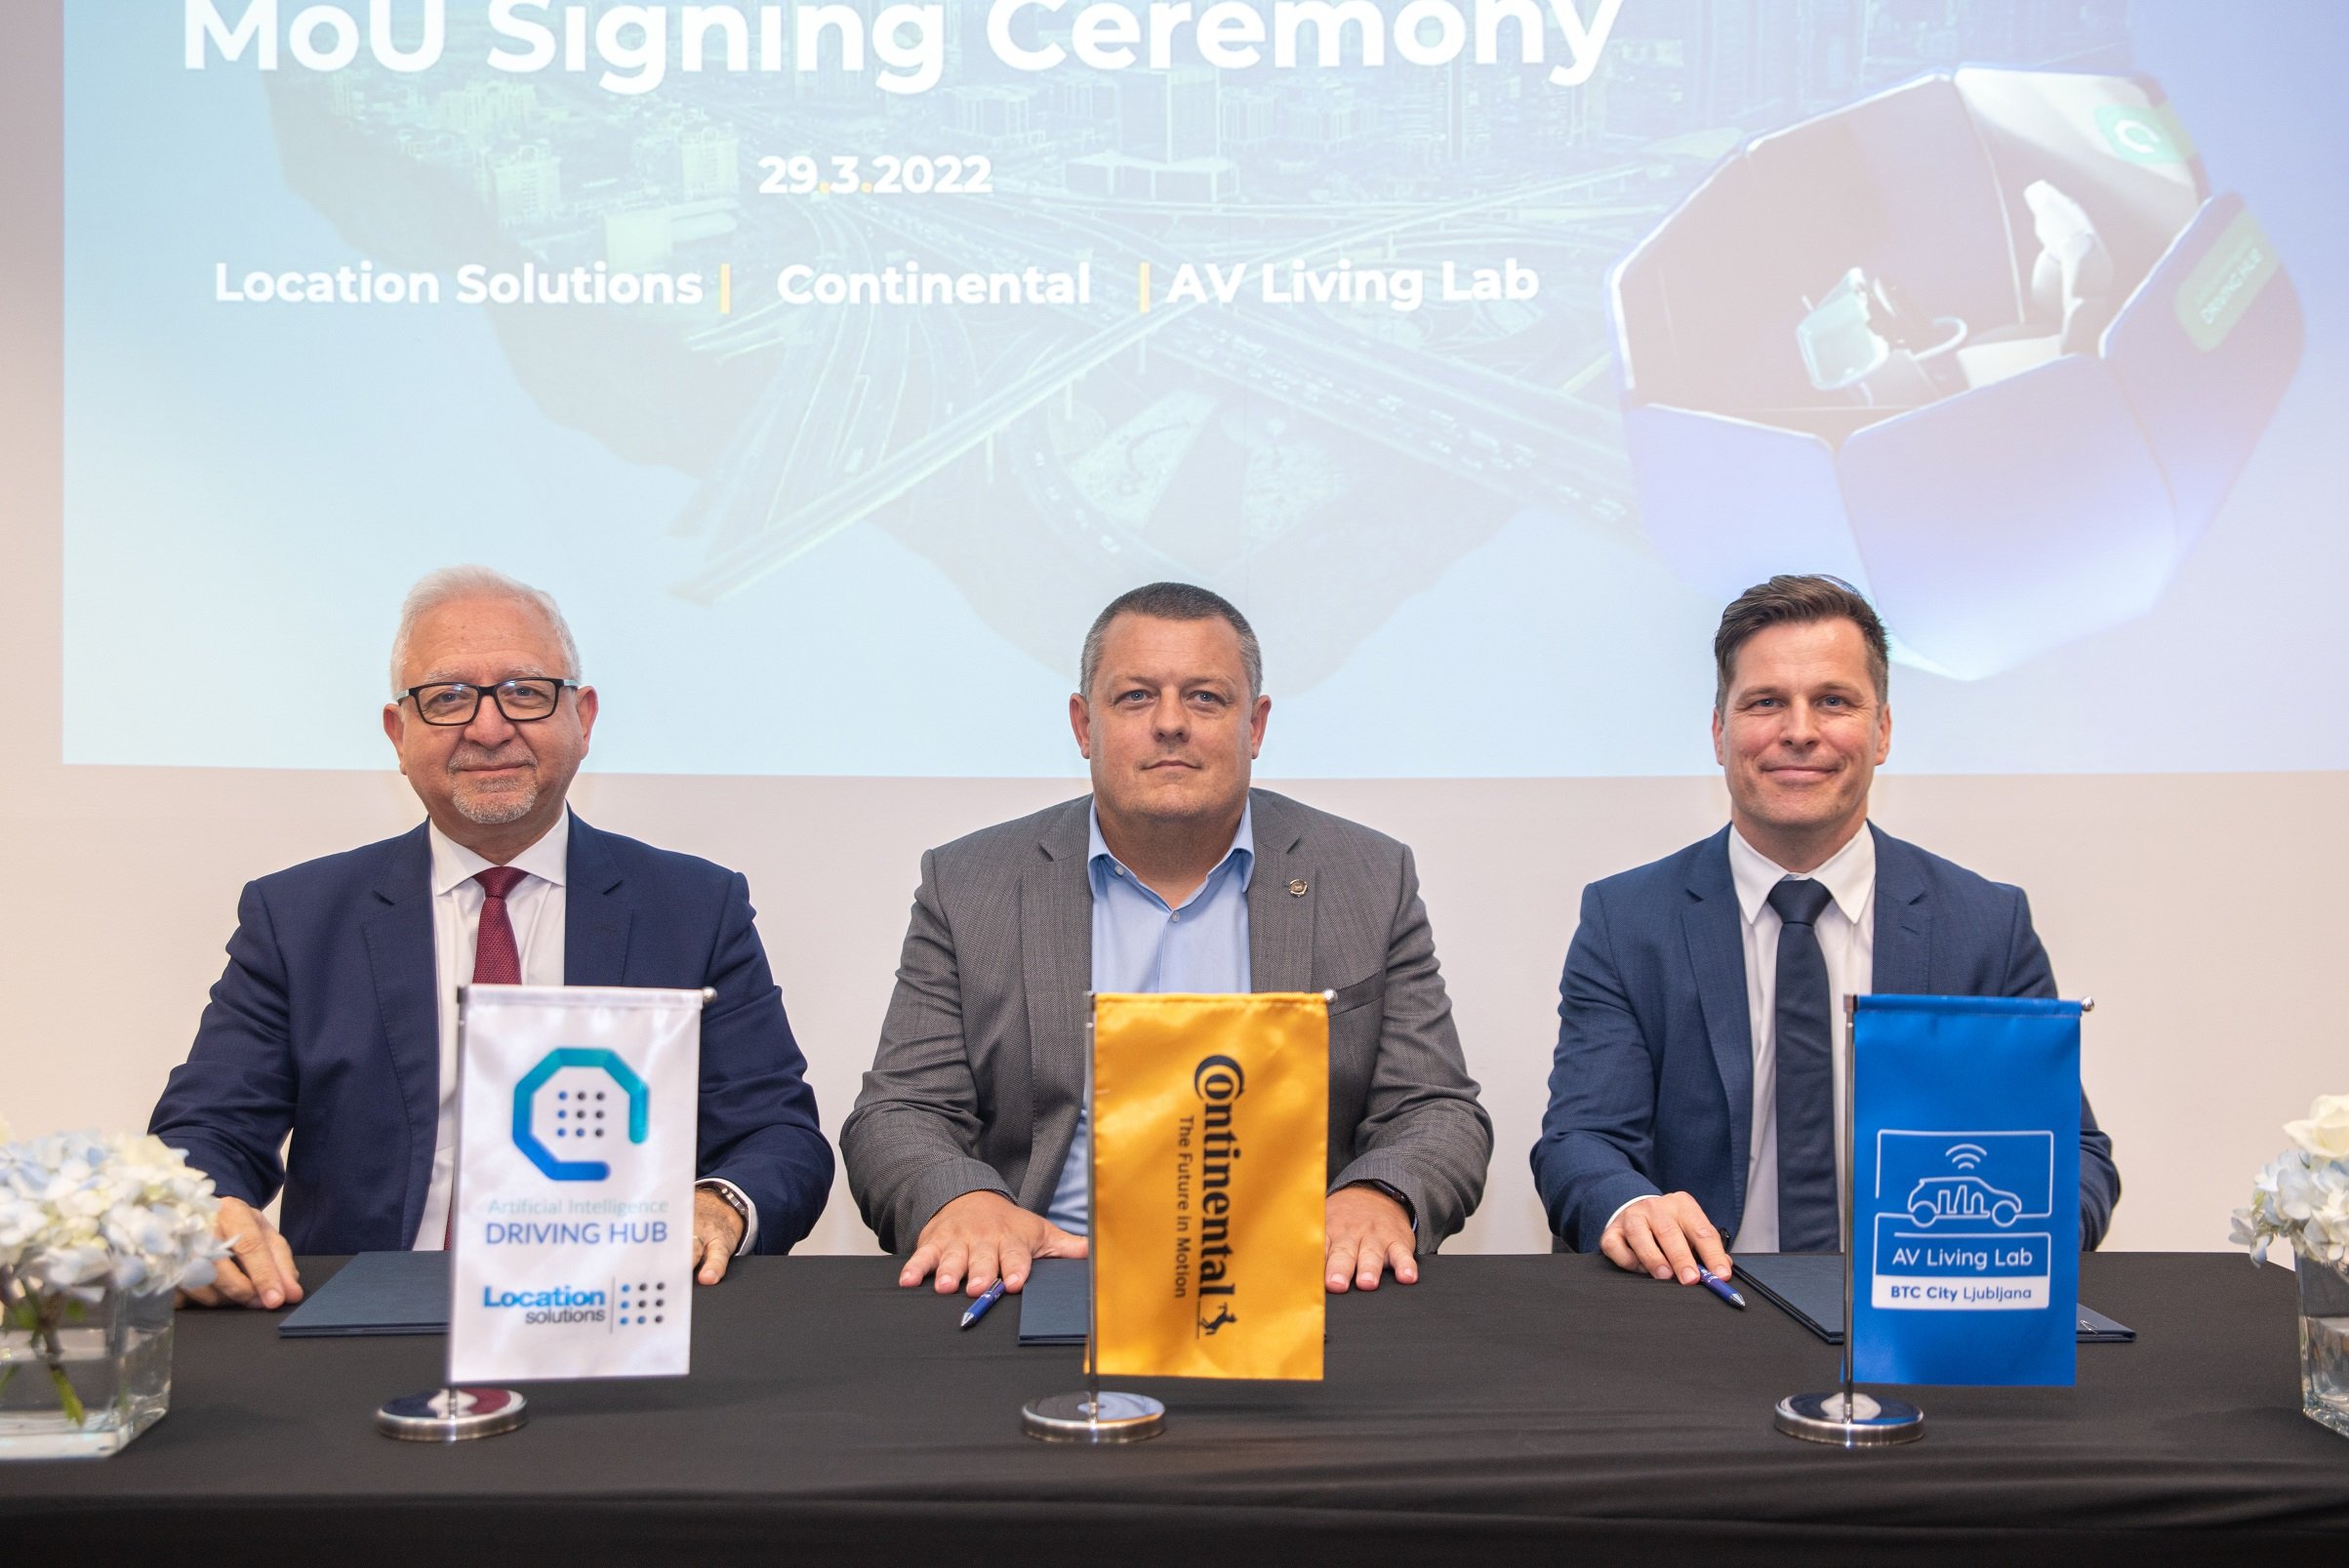 Continental and AV Living Lab sign agreement at Slovenian Pavilion at EXPO 2020